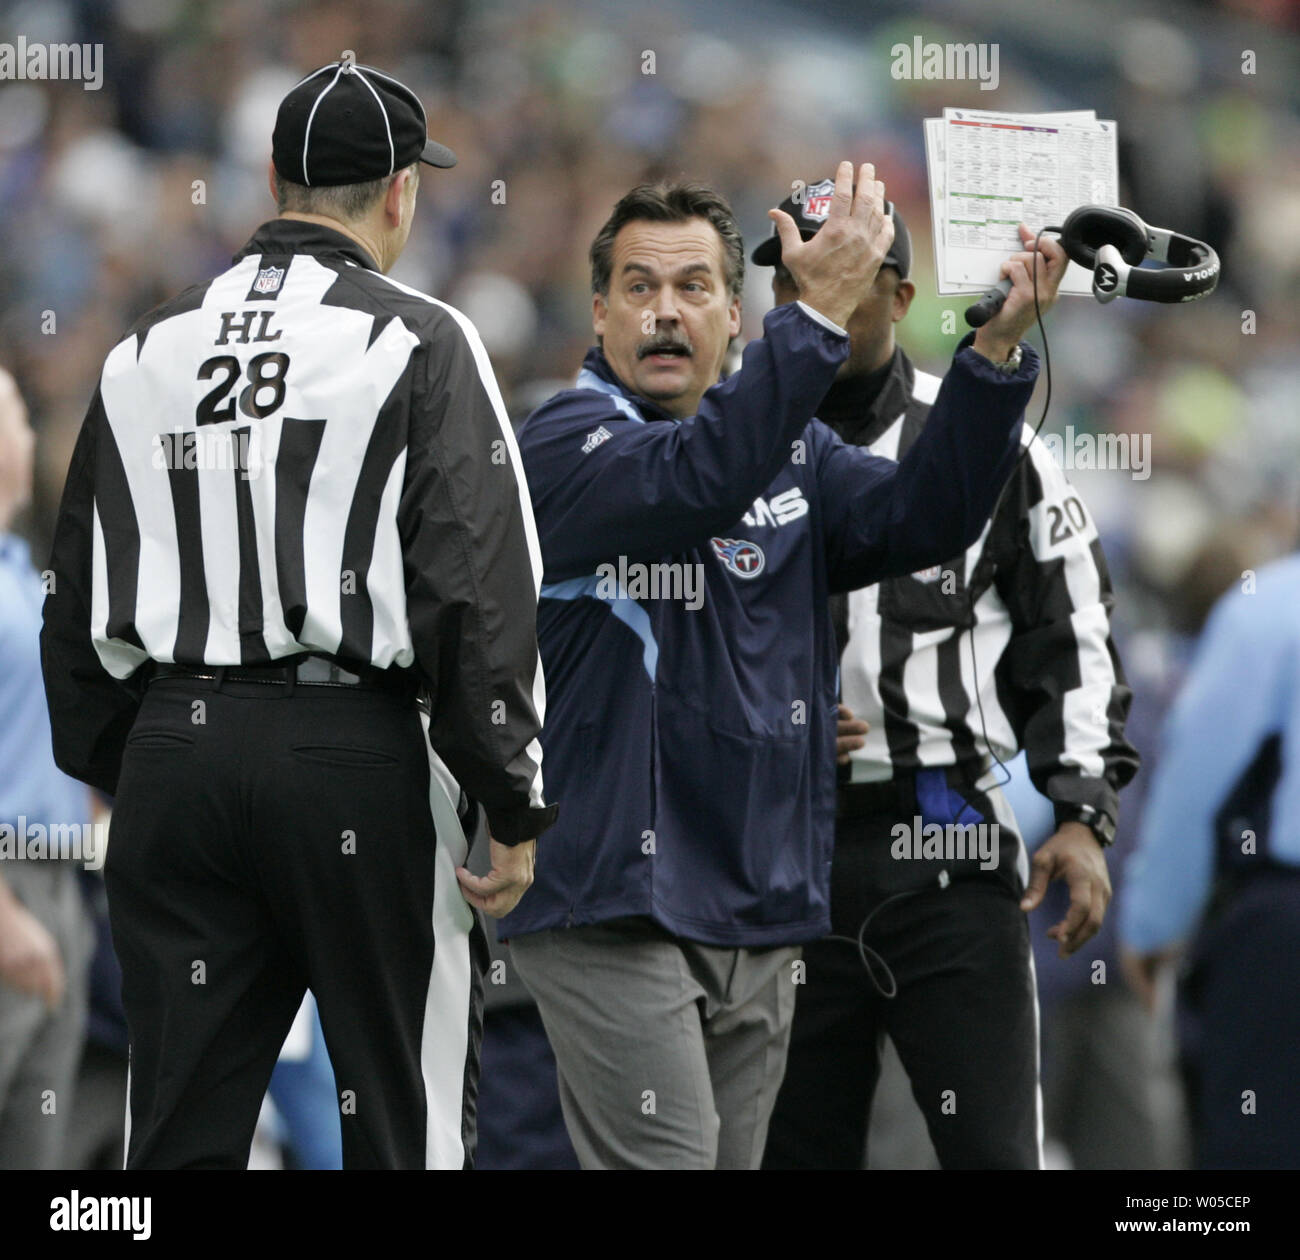 Tennessee Titans Head Coach Jeff Fisher (C) argues a penalty to head linesman Mark Hittner against his team in the second period against the Seattle Seahawks at Qwest Field in Seattle on January 3, 2010. The Titans beat the Seahawks 17-13.  UPI /Jim Bryant Stock Photo